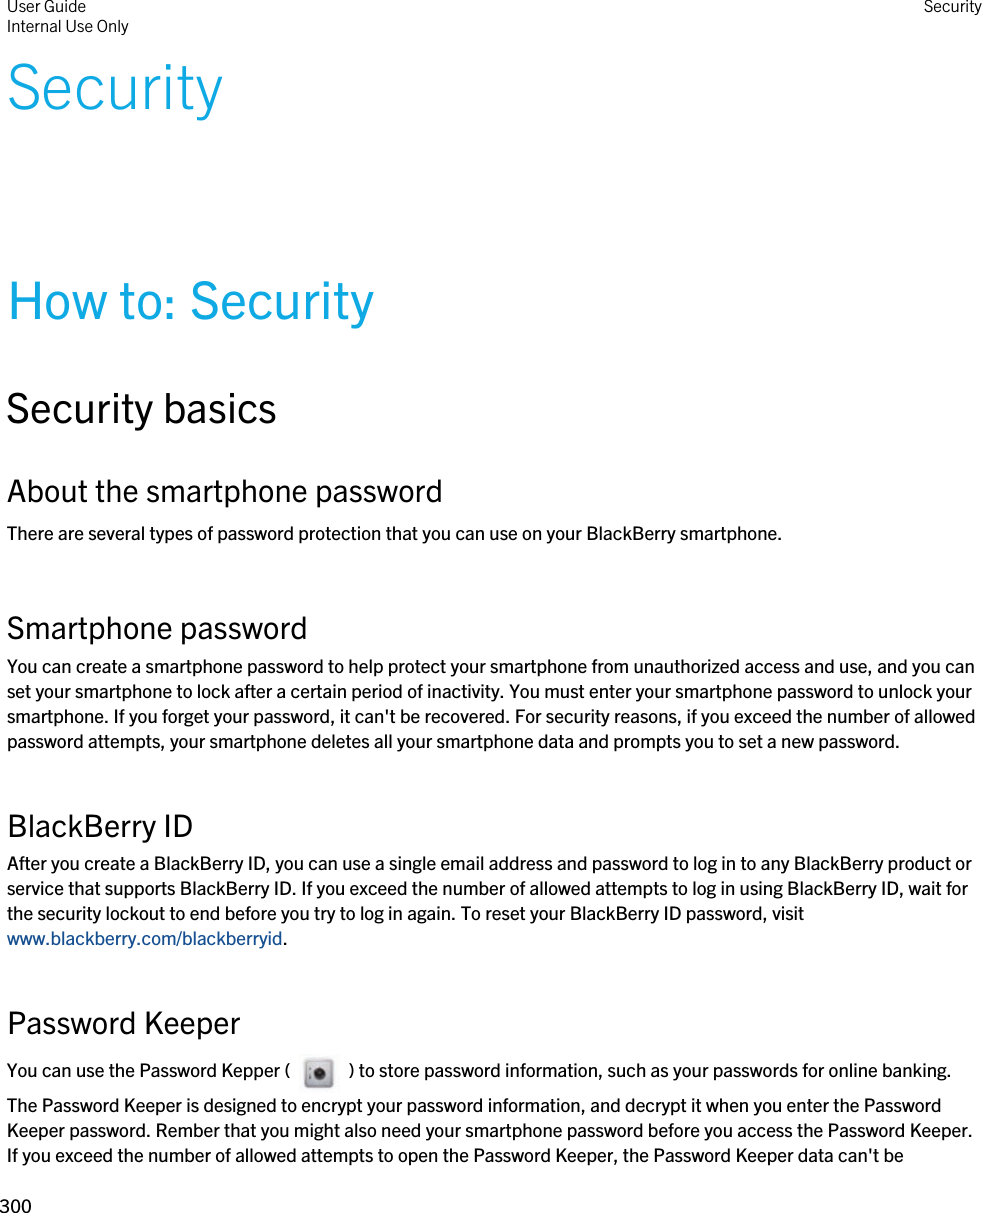 SecurityHow to: SecuritySecurity basicsAbout the smartphone passwordThere are several types of password protection that you can use on your BlackBerry smartphone.Smartphone passwordYou can create a smartphone password to help protect your smartphone from unauthorized access and use, and you can set your smartphone to lock after a certain period of inactivity. You must enter your smartphone password to unlock your smartphone. If you forget your password, it can&apos;t be recovered. For security reasons, if you exceed the number of allowed password attempts, your smartphone deletes all your smartphone data and prompts you to set a new password.BlackBerry IDAfter you create a BlackBerry ID, you can use a single email address and password to log in to any BlackBerry product or service that supports BlackBerry ID. If you exceed the number of allowed attempts to log in using BlackBerry ID, wait for the security lockout to end before you try to log in again. To reset your BlackBerry ID password, visit www.blackberry.com/blackberryid.Password KeeperYou can use the Password Kepper (     ) to store password information, such as your passwords for online banking. The Password Keeper is designed to encrypt your password information, and decrypt it when you enter the Password Keeper password. Rember that you might also need your smartphone password before you access the Password Keeper. If you exceed the number of allowed attempts to open the Password Keeper, the Password Keeper data can&apos;t be User GuideInternal Use Only Security300 